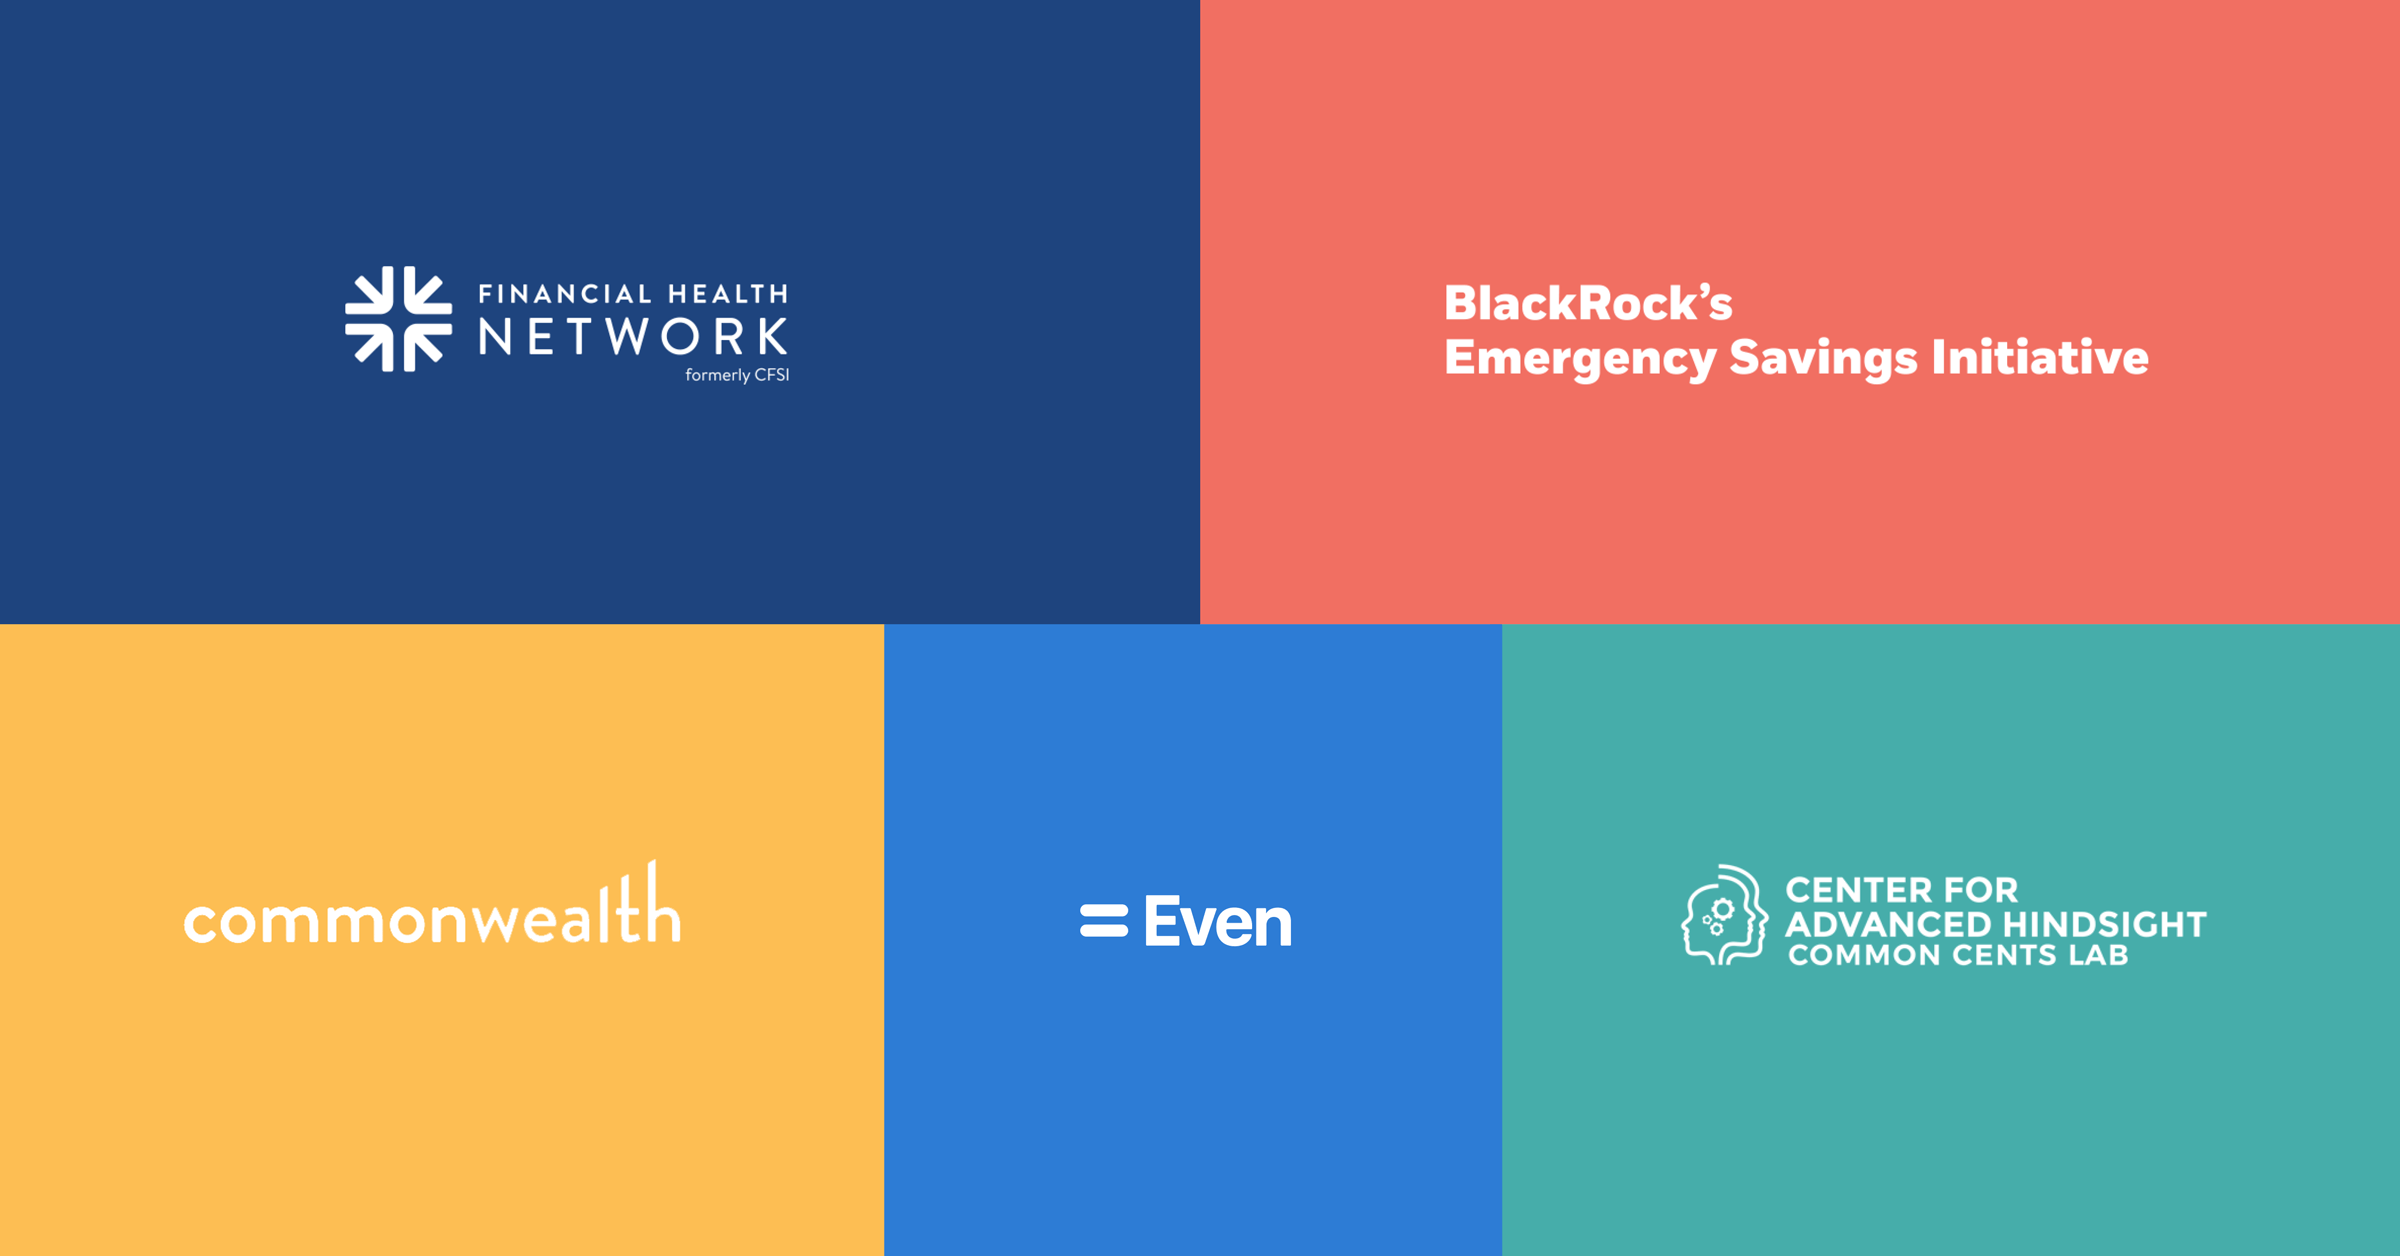 A series of squares showing logos for The Financial Health Network, BlackRock's Emergency Savings Initiative, Commonwealth, Even, and the Center for Advanced Hindsight Common Cents Lab